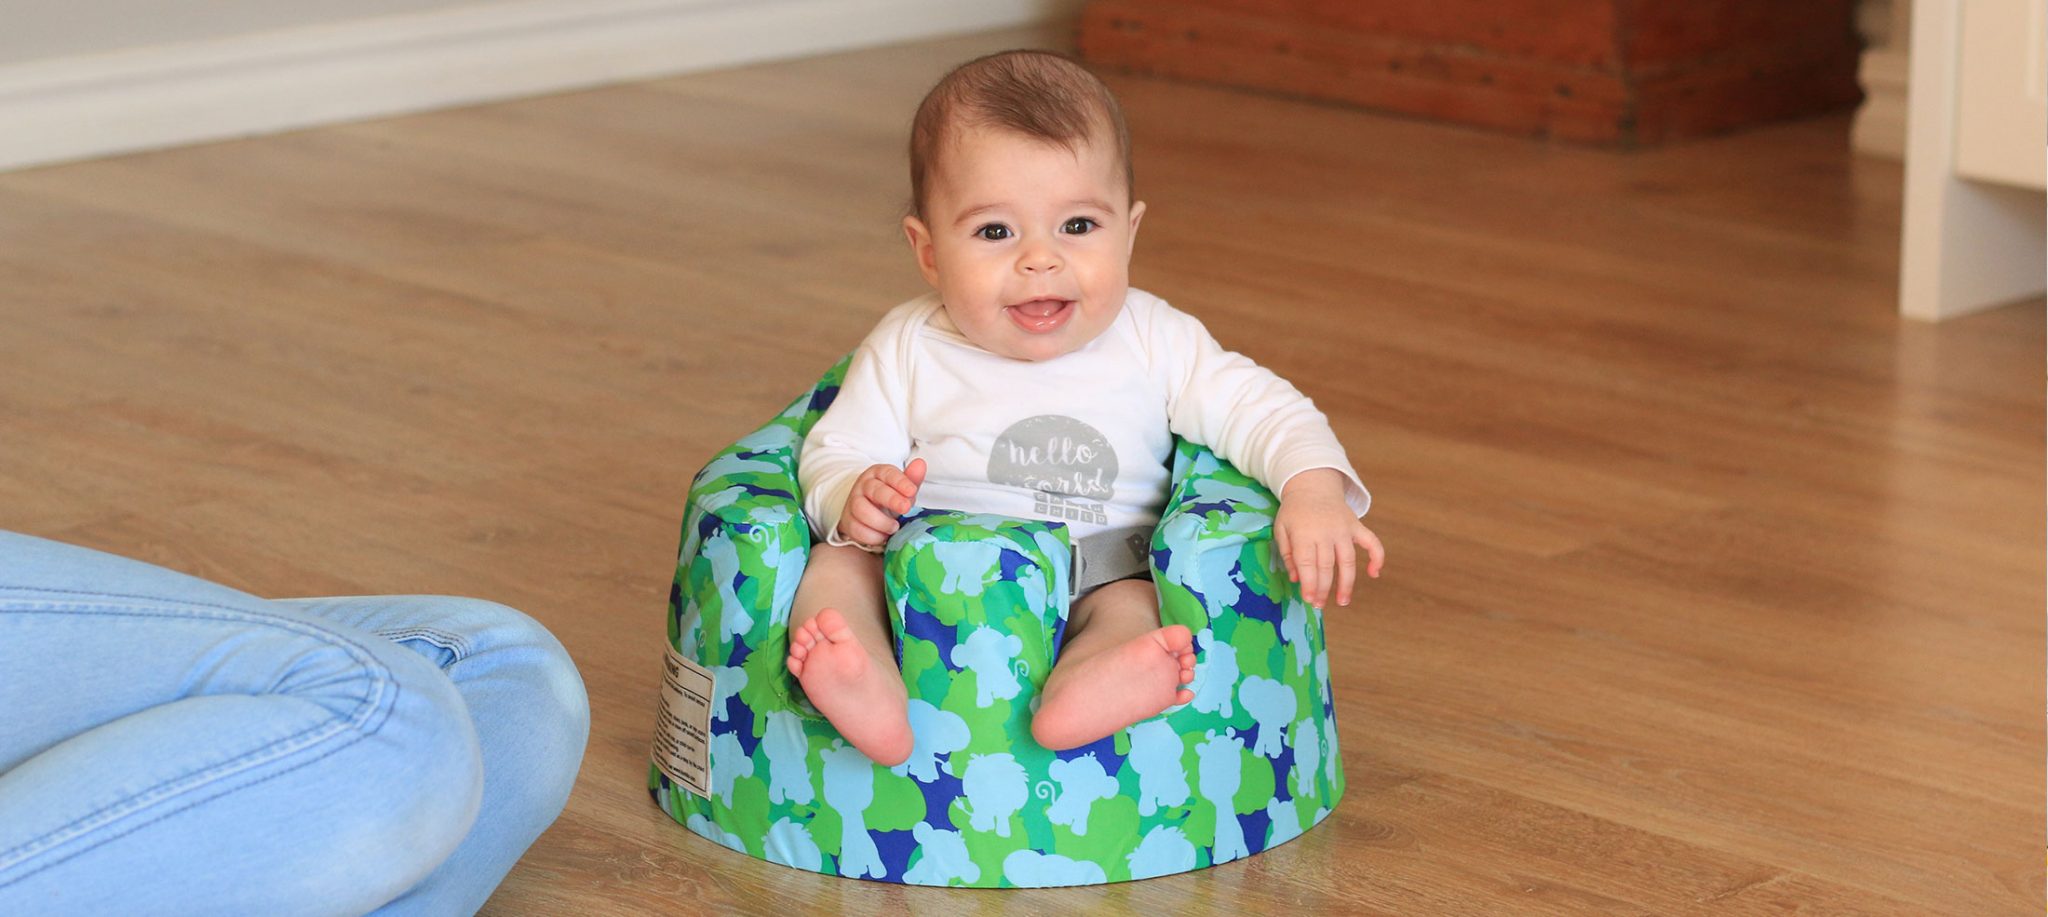 At What Age Can Baby Use Bumbo Seat - Baby Viewer